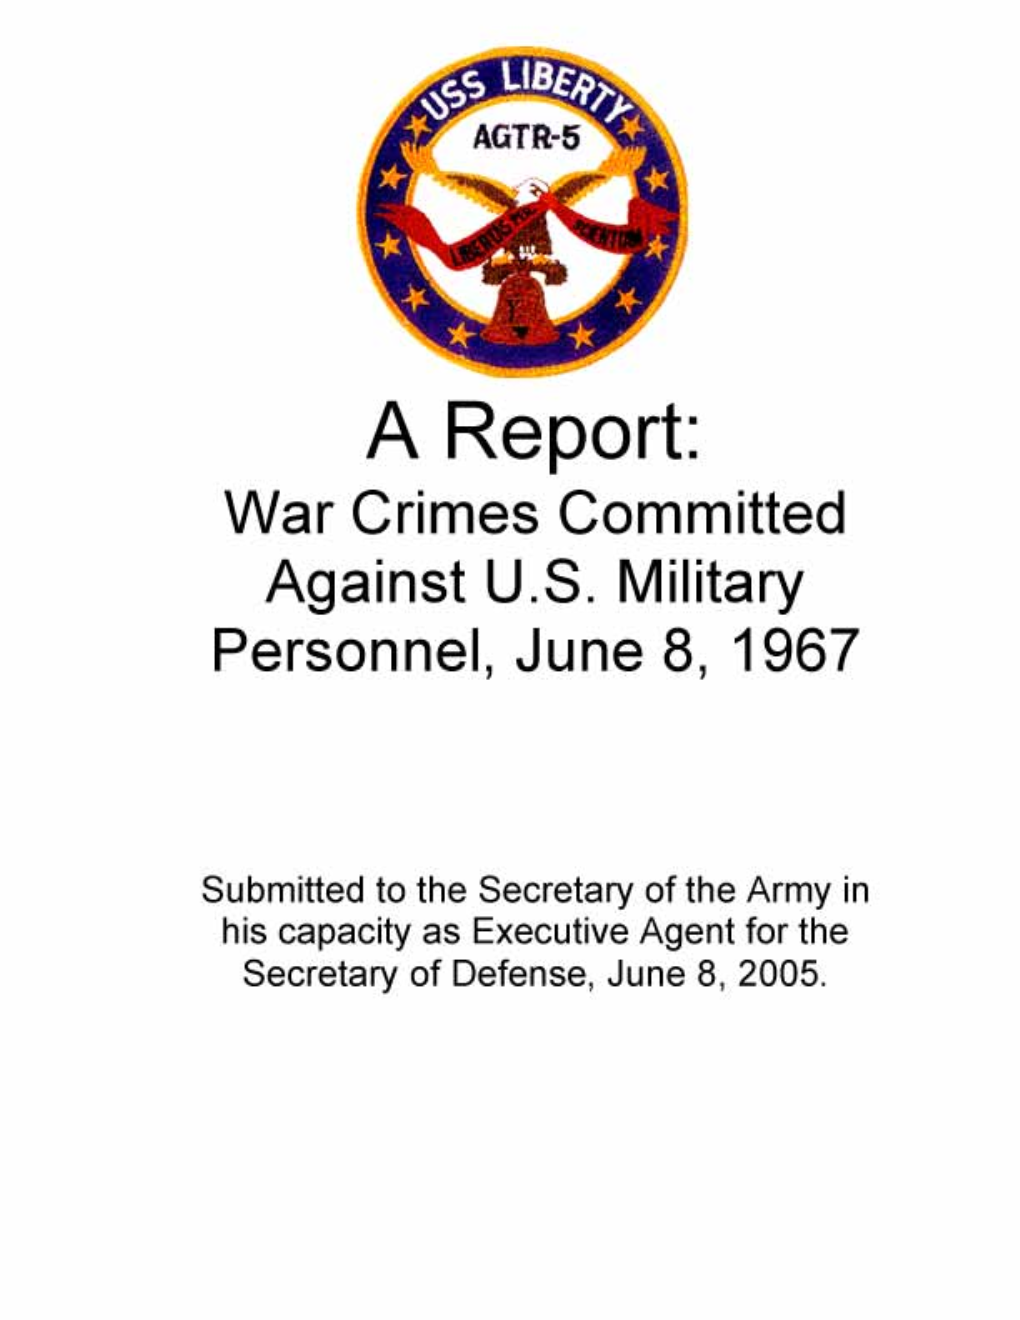 A Report of War Crimes Committed